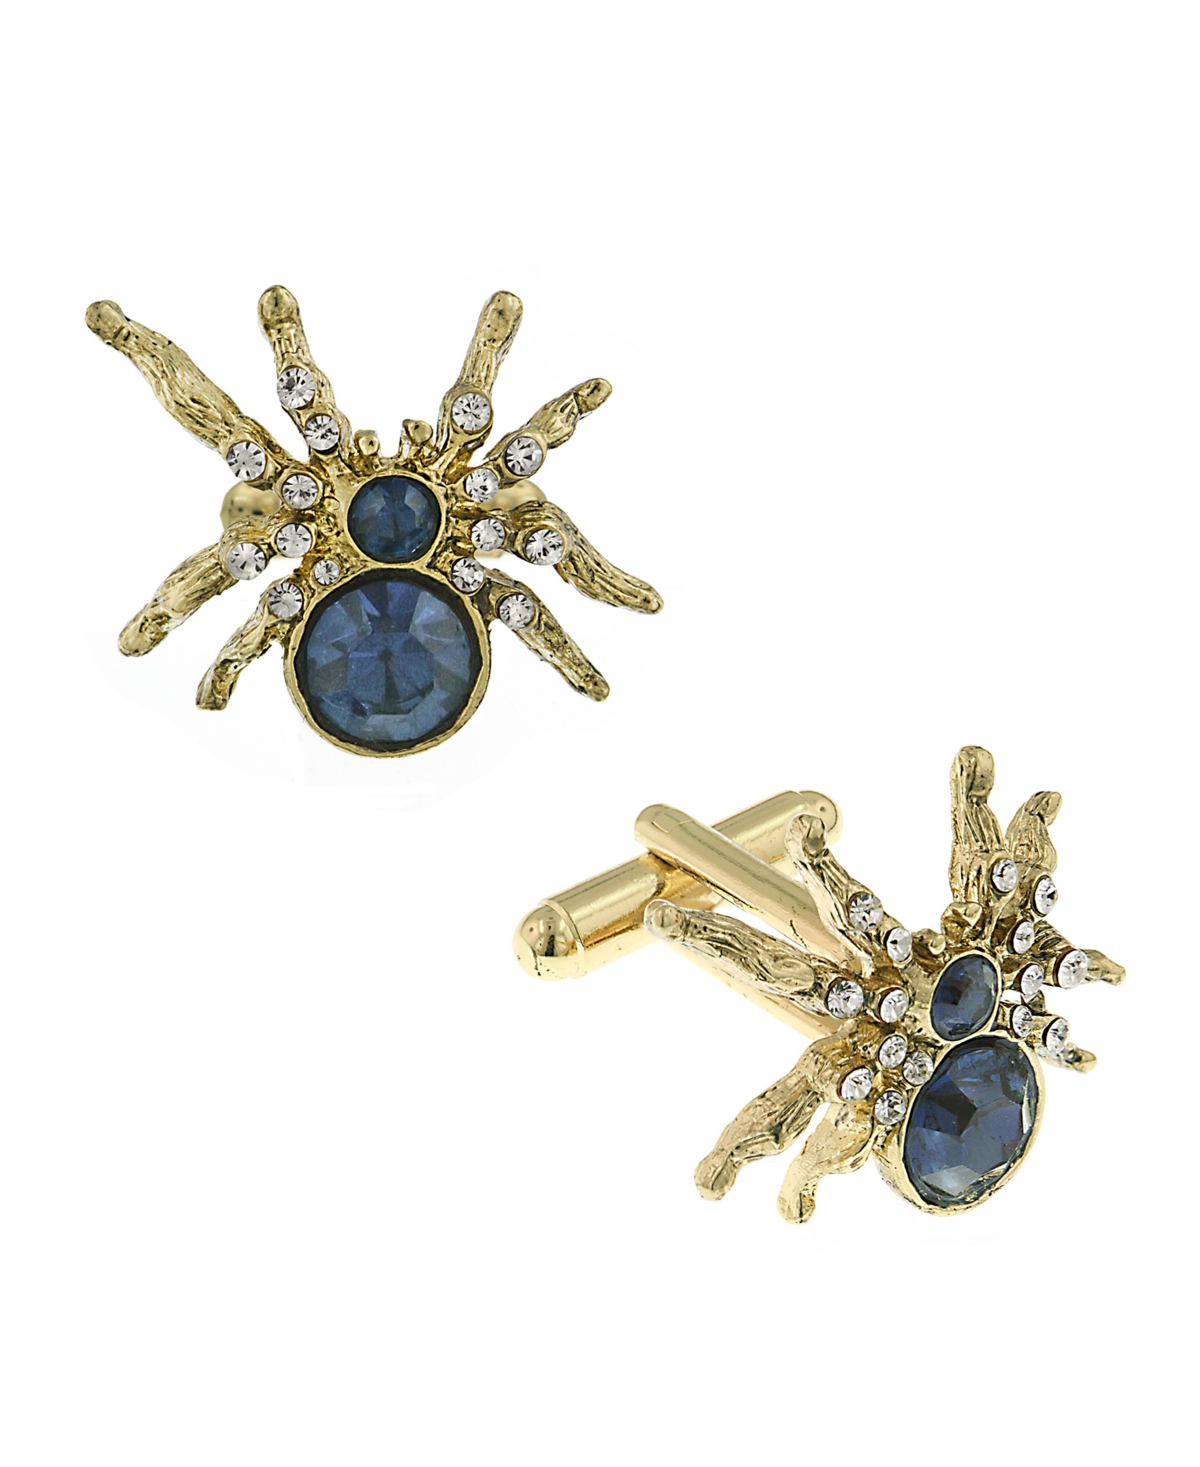 1928 Jewelry 14k Gold Plated Crystal Spider Cufflinks In Blue